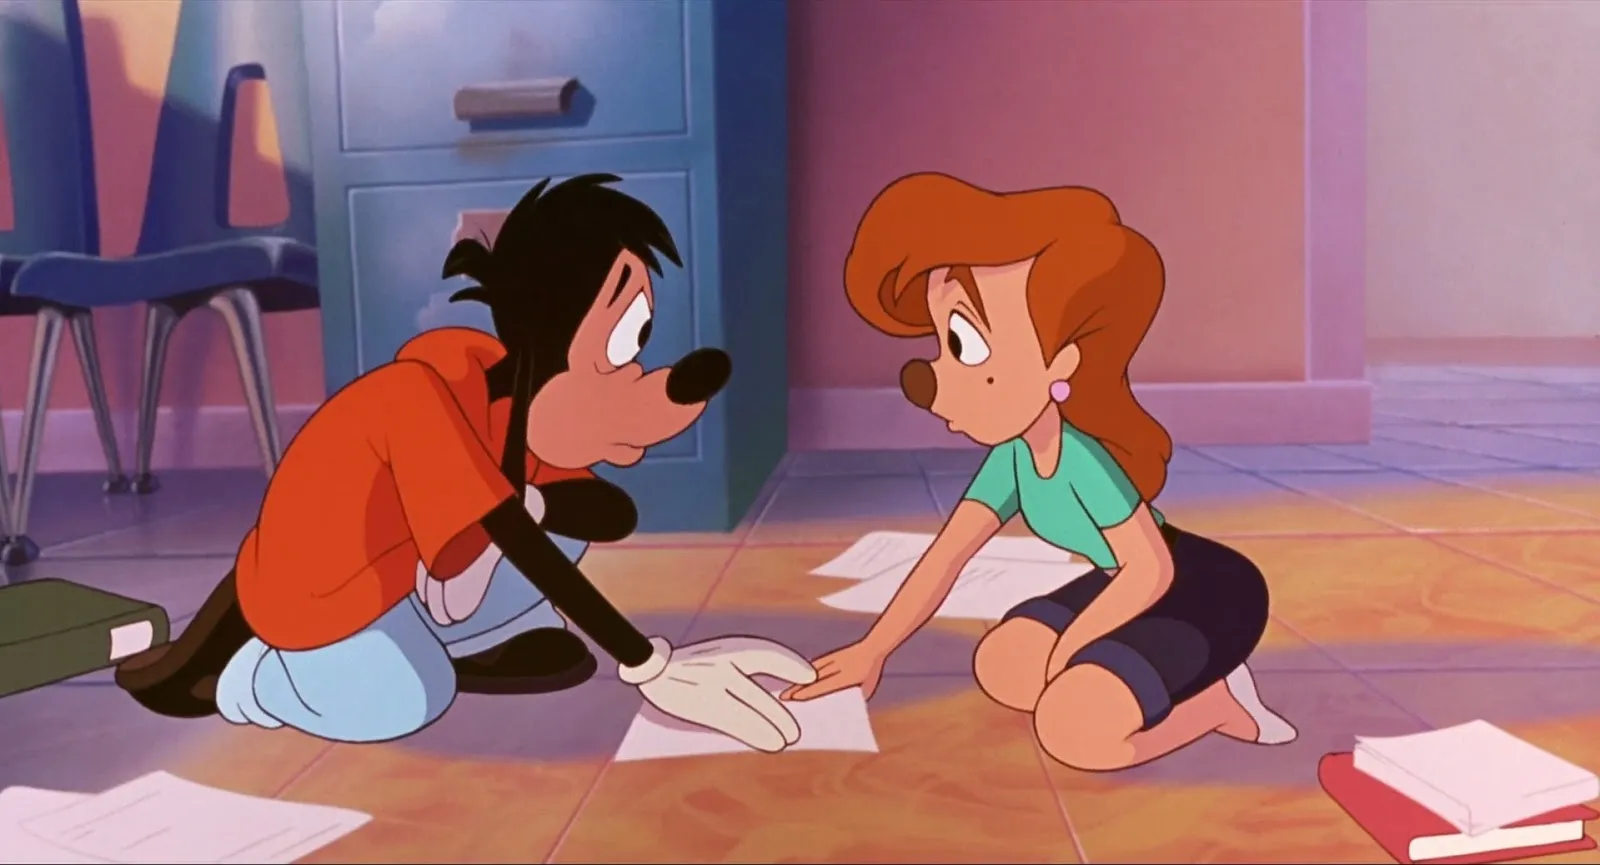 Dress Up Like Max and Roxanne From A Goofy Movie